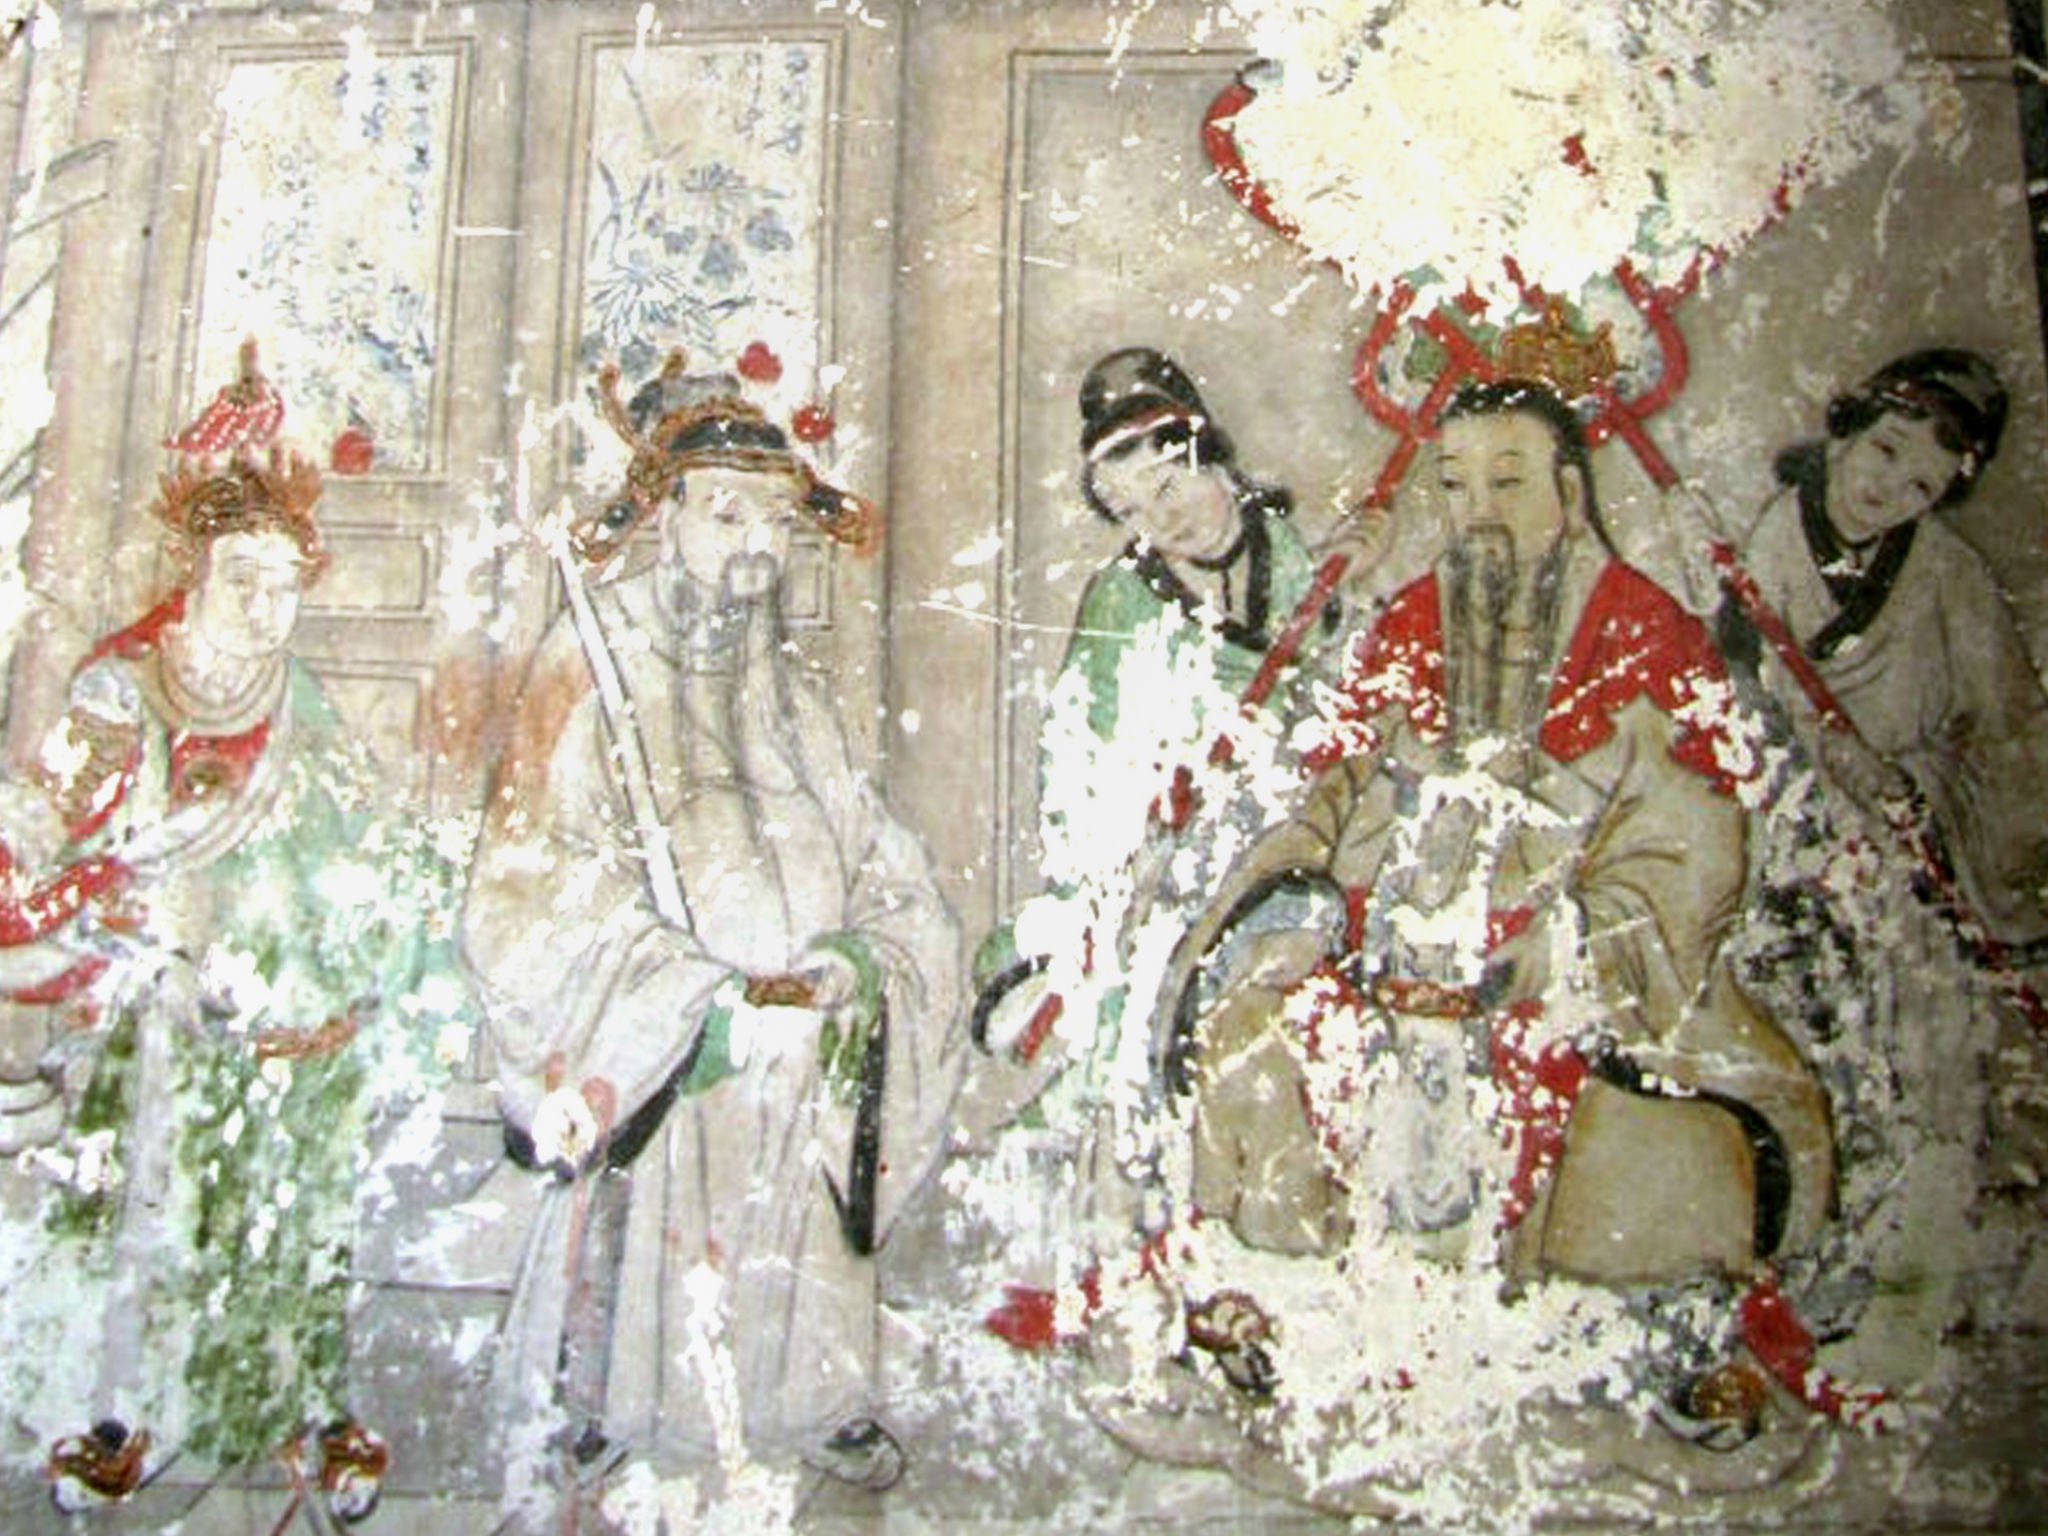 One of the ancient frescos that are currently covered by cartoon-like paintings in Yunjie Temple in Chaoyang